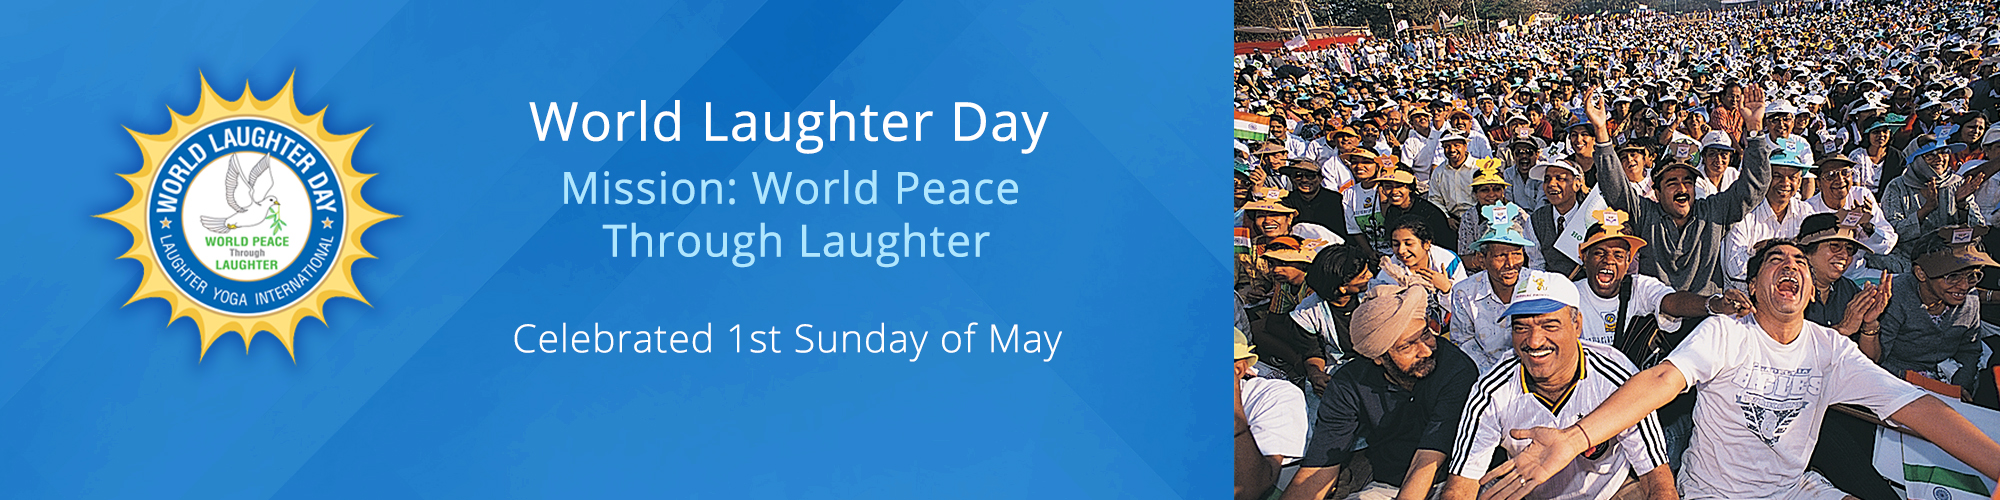 world-laughter-day-banner